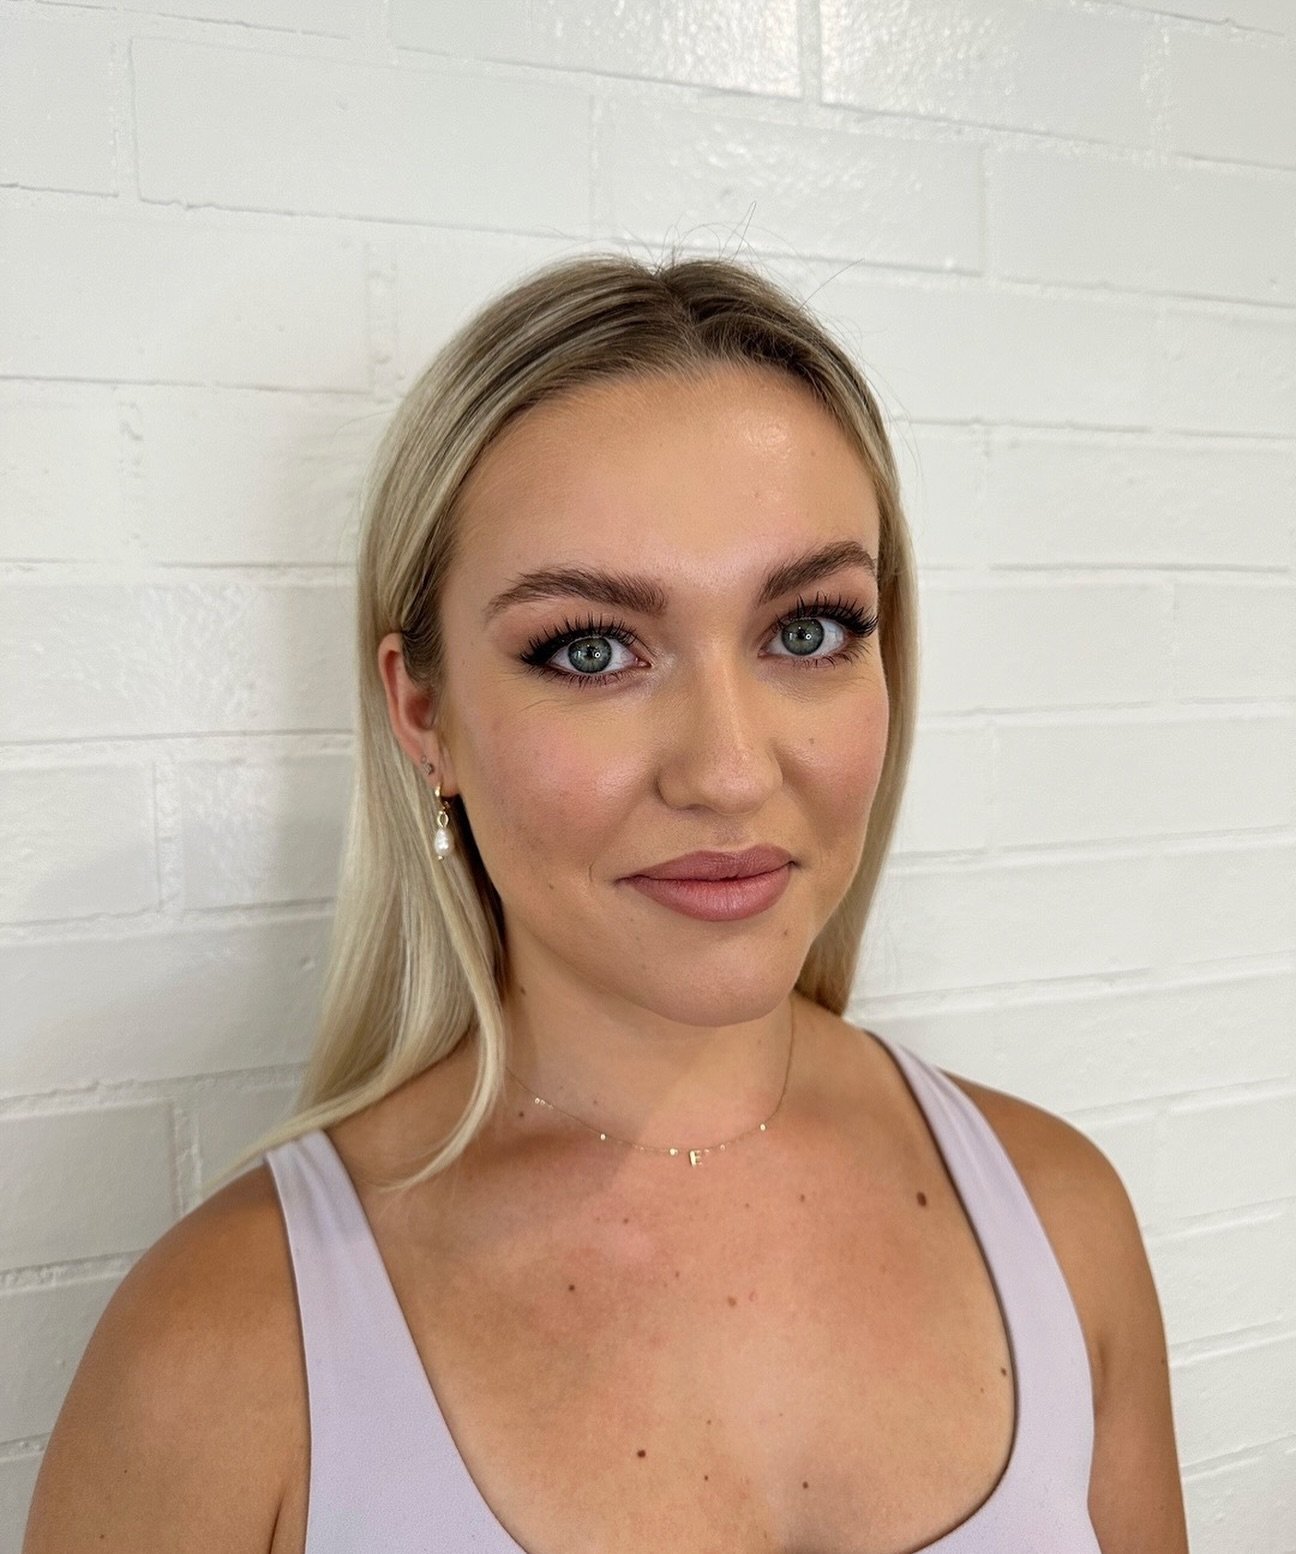 Bronzed + Blushed 🥀 

Beauty - @emmatremain 

Do you have a special occasion coming up? Makeup bookings are available via the booking link in our bio x 

#makeup #mua #makeupartist #makeuplook #beauty #blush #naturalmakeup #glam #mudgeemakeupartist 